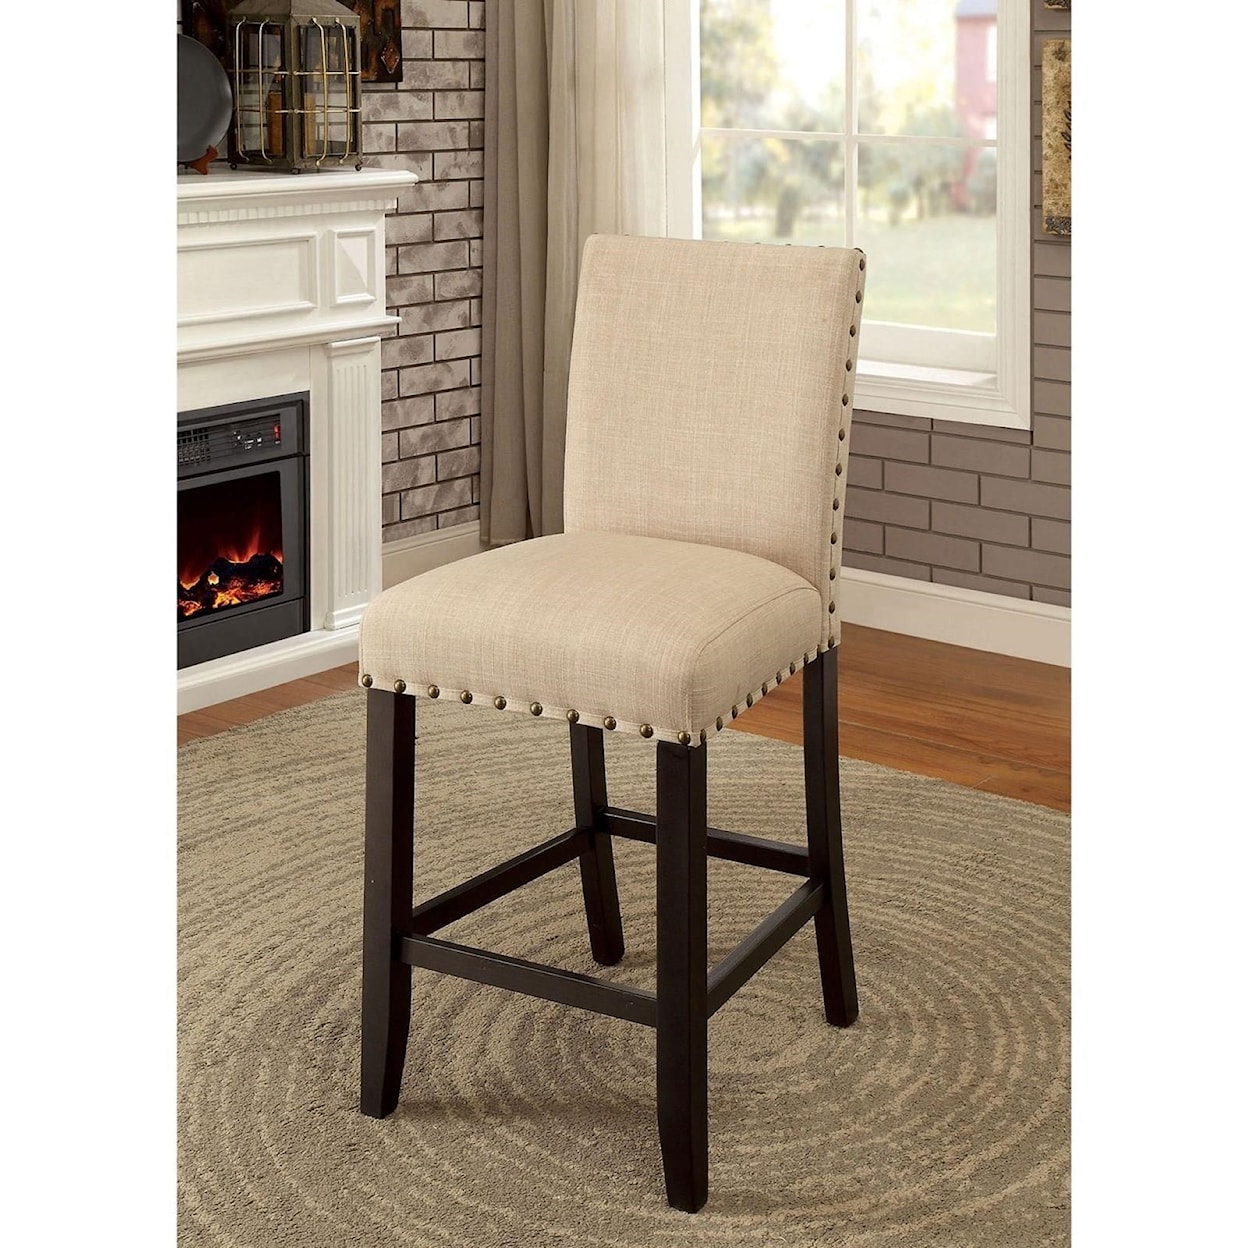 Furniture of America Kaitlin Set of 2 Counter Height Chairs